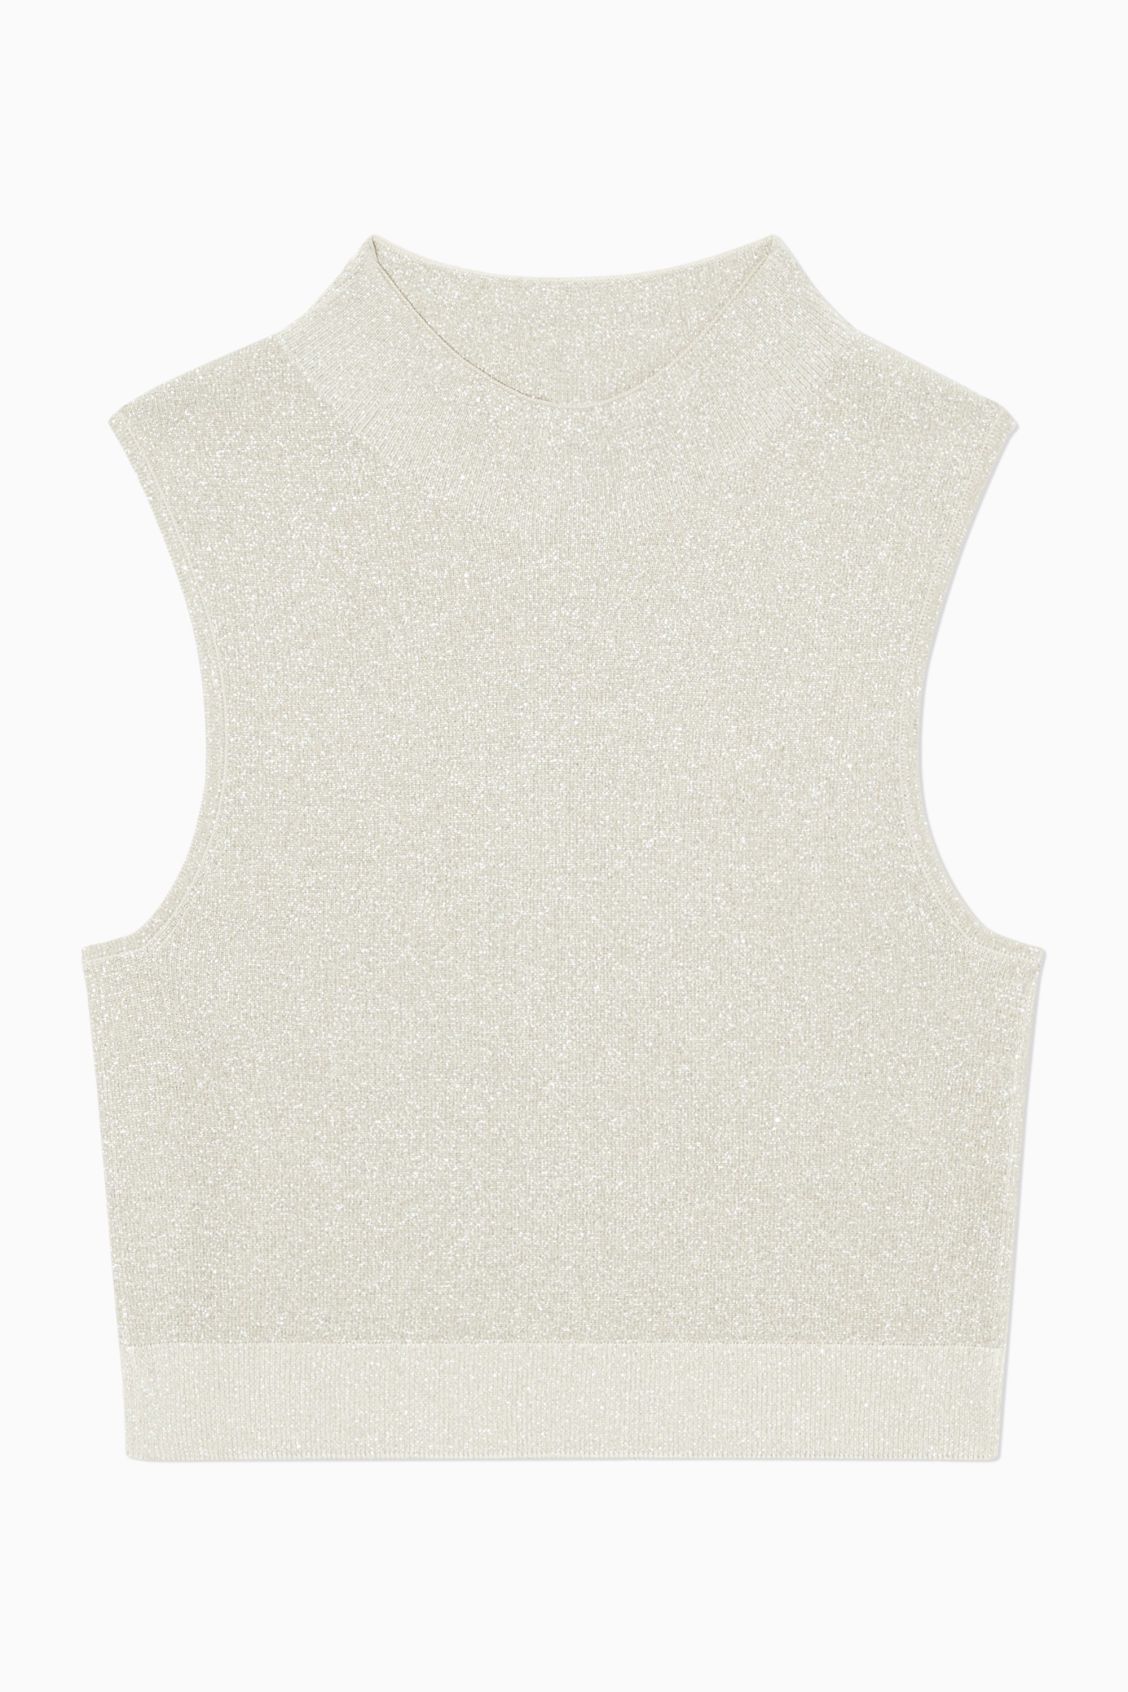 CROPPED KNITTED SLEEVELESS TOP
                        
						£45
	                           		... | COS UK